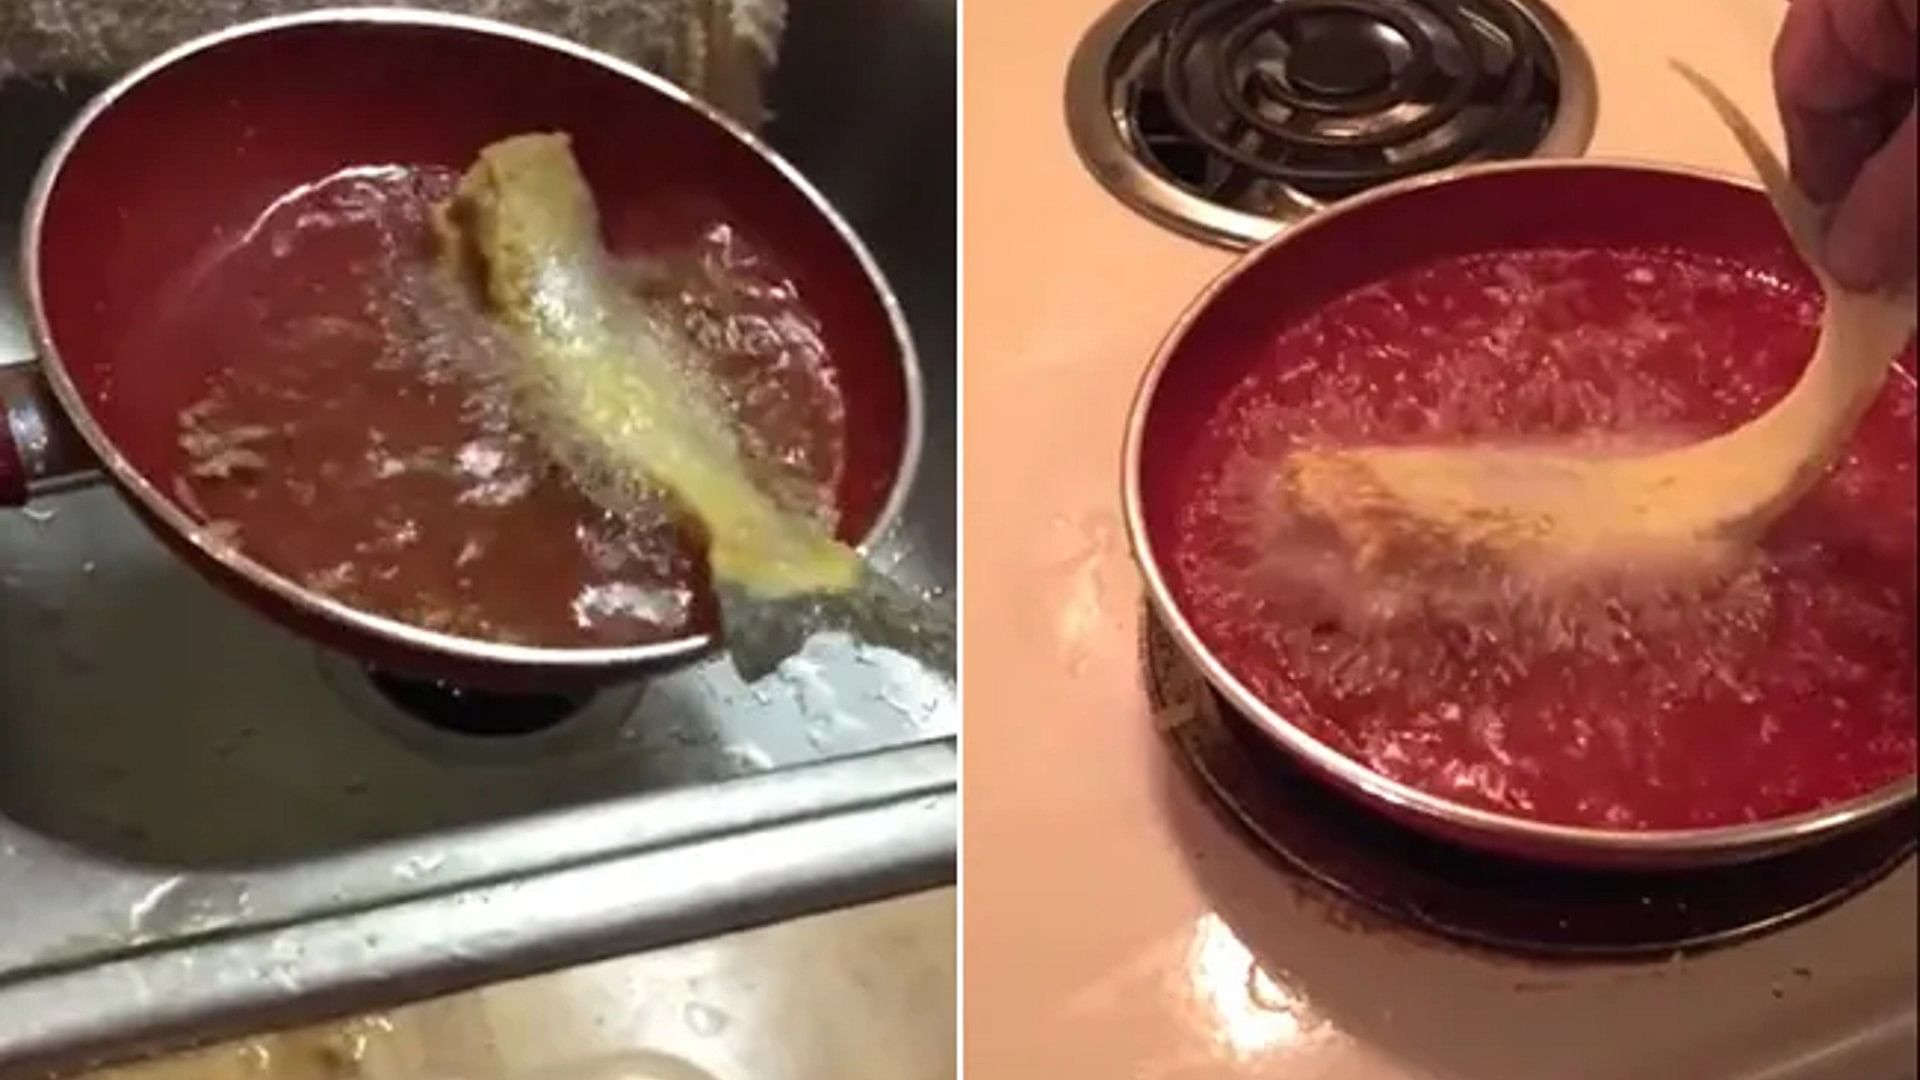 fish became alive while frying in hot oil video going viral on social media